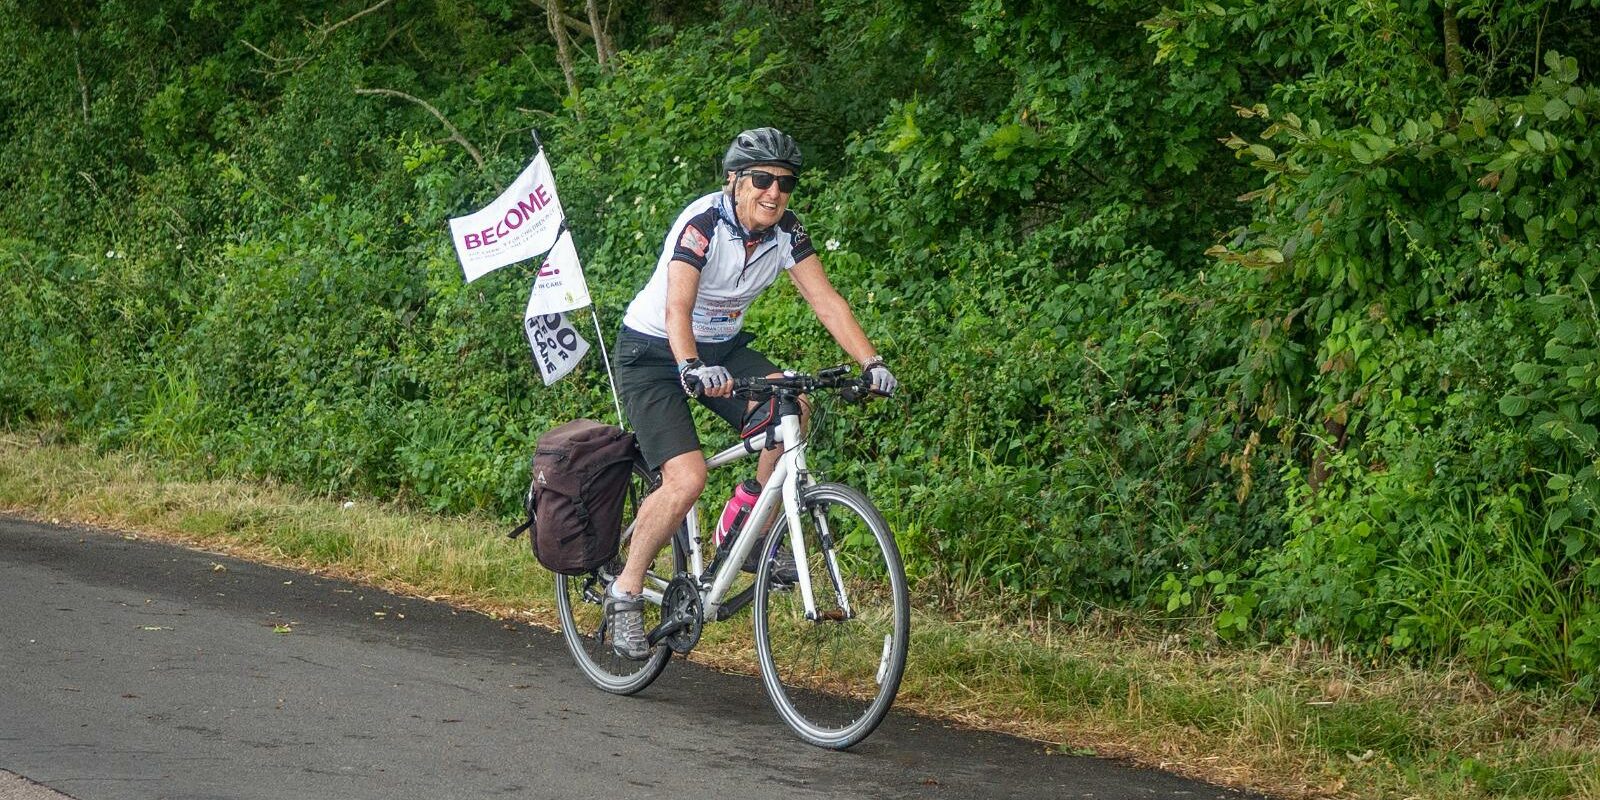 Gill cycling with Become flag on the back of the bike